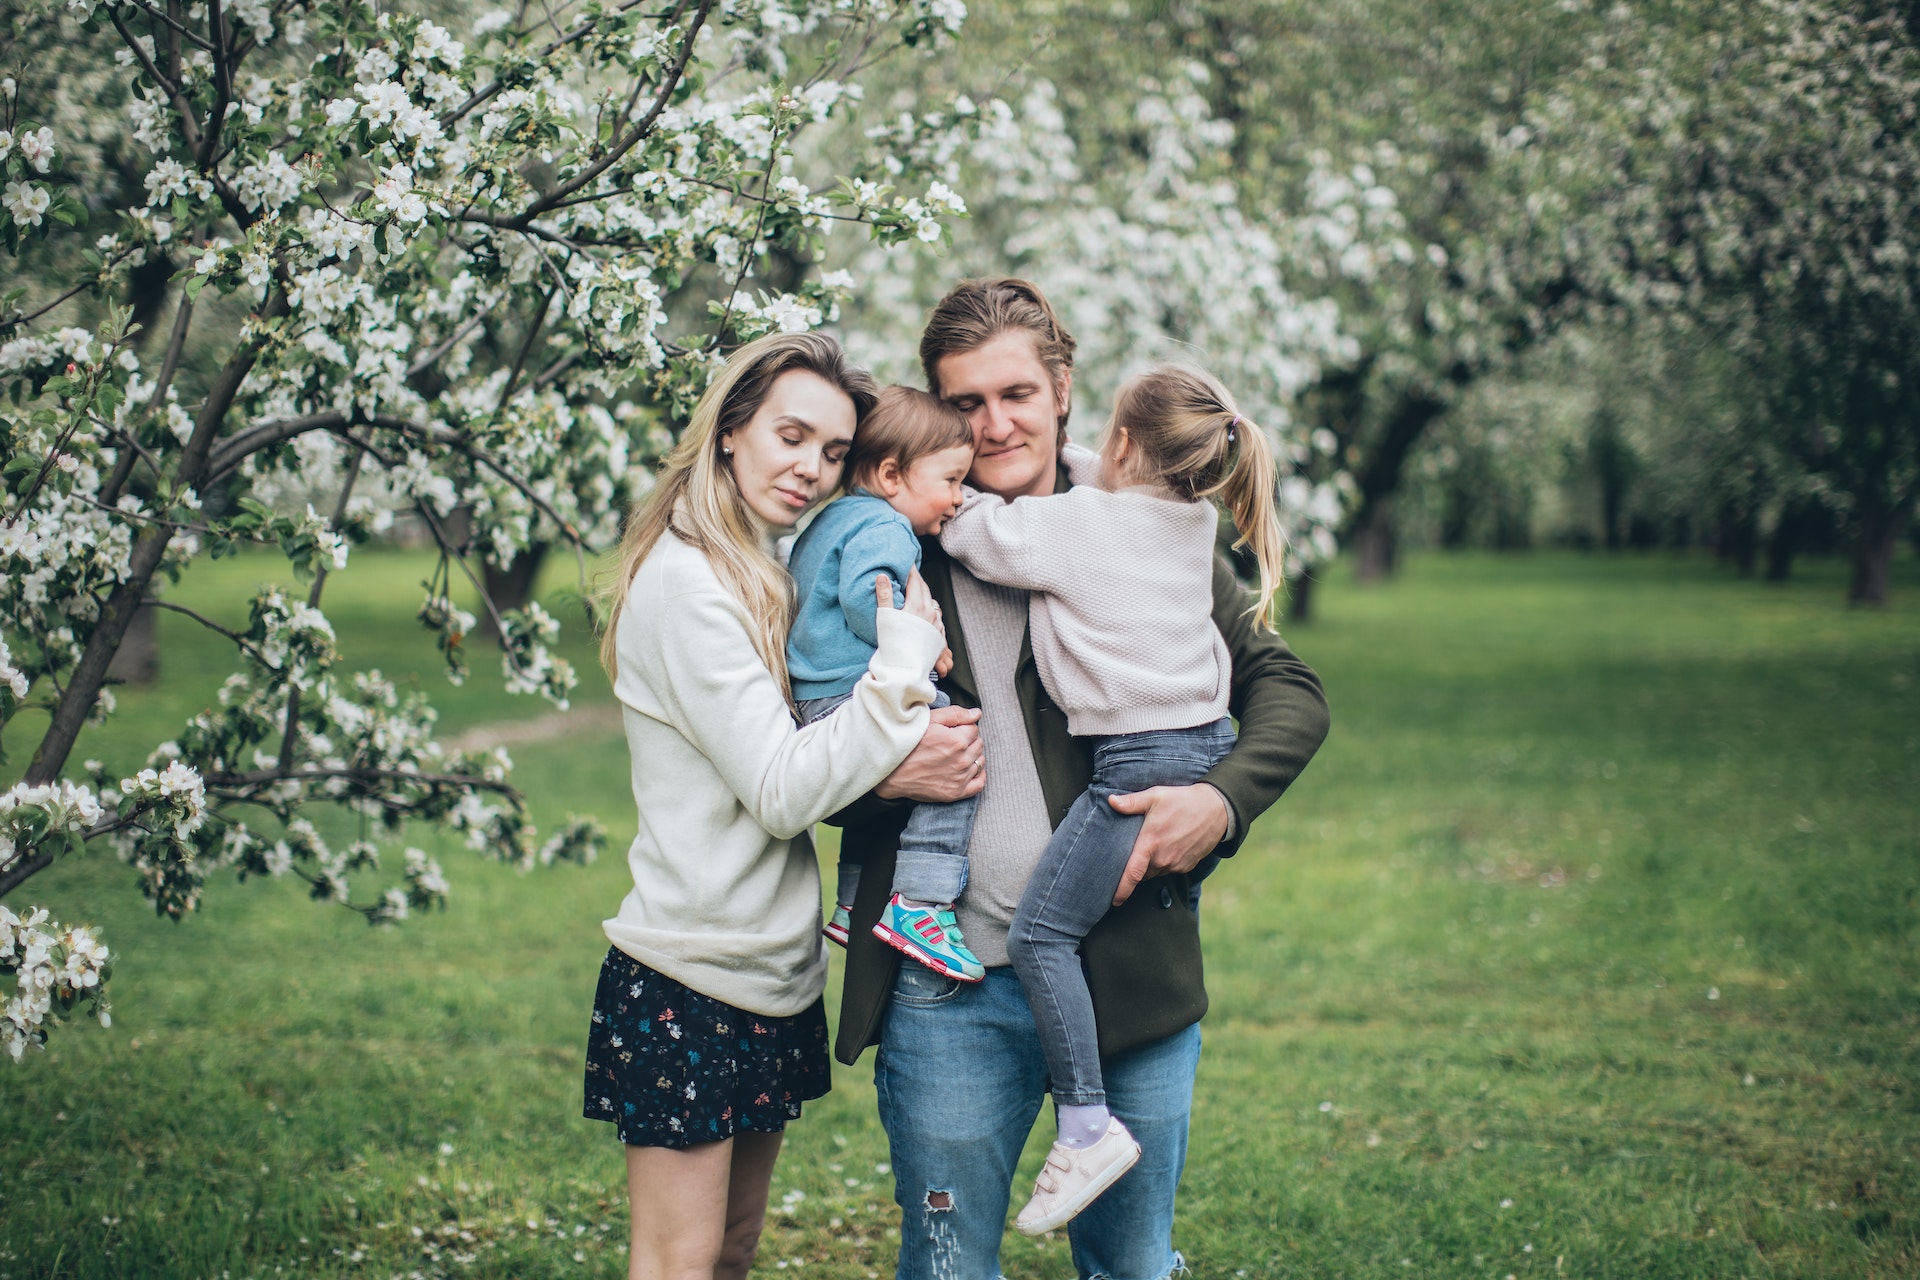 A couple with their children | Source: Pexels